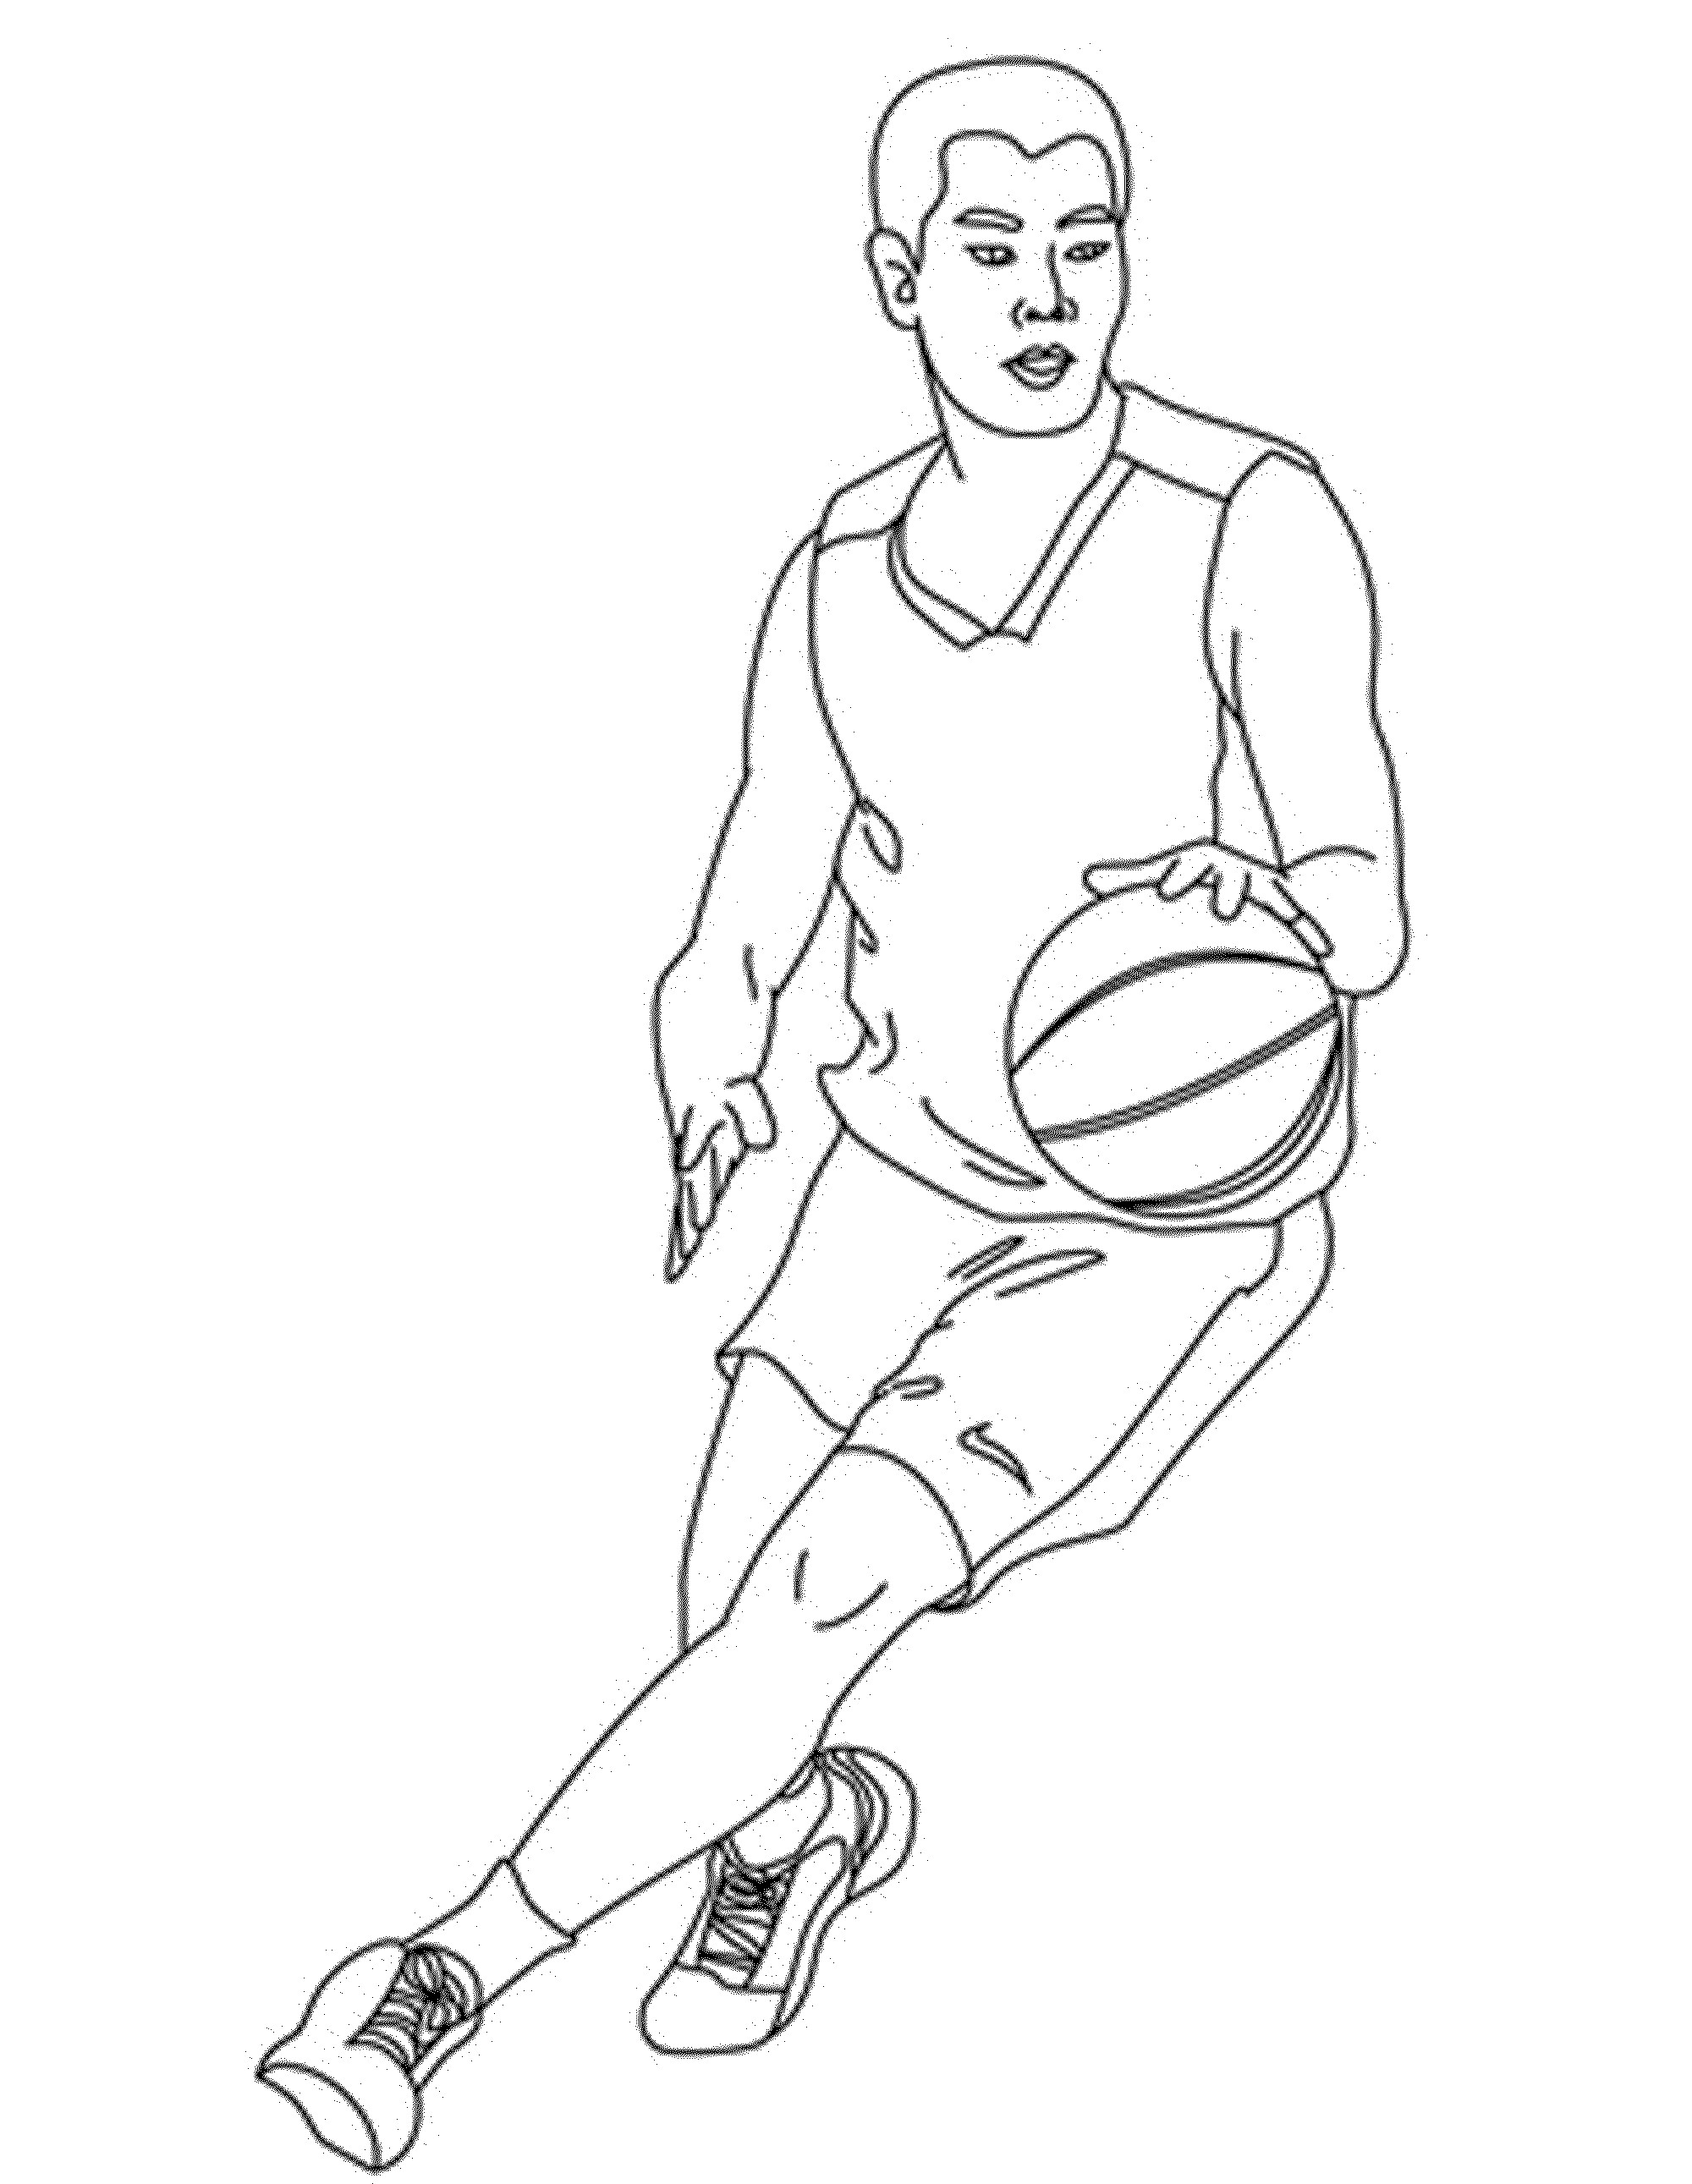 Basketball Duck Coloring Sheets For Boys
 realistic basketball coloring pages